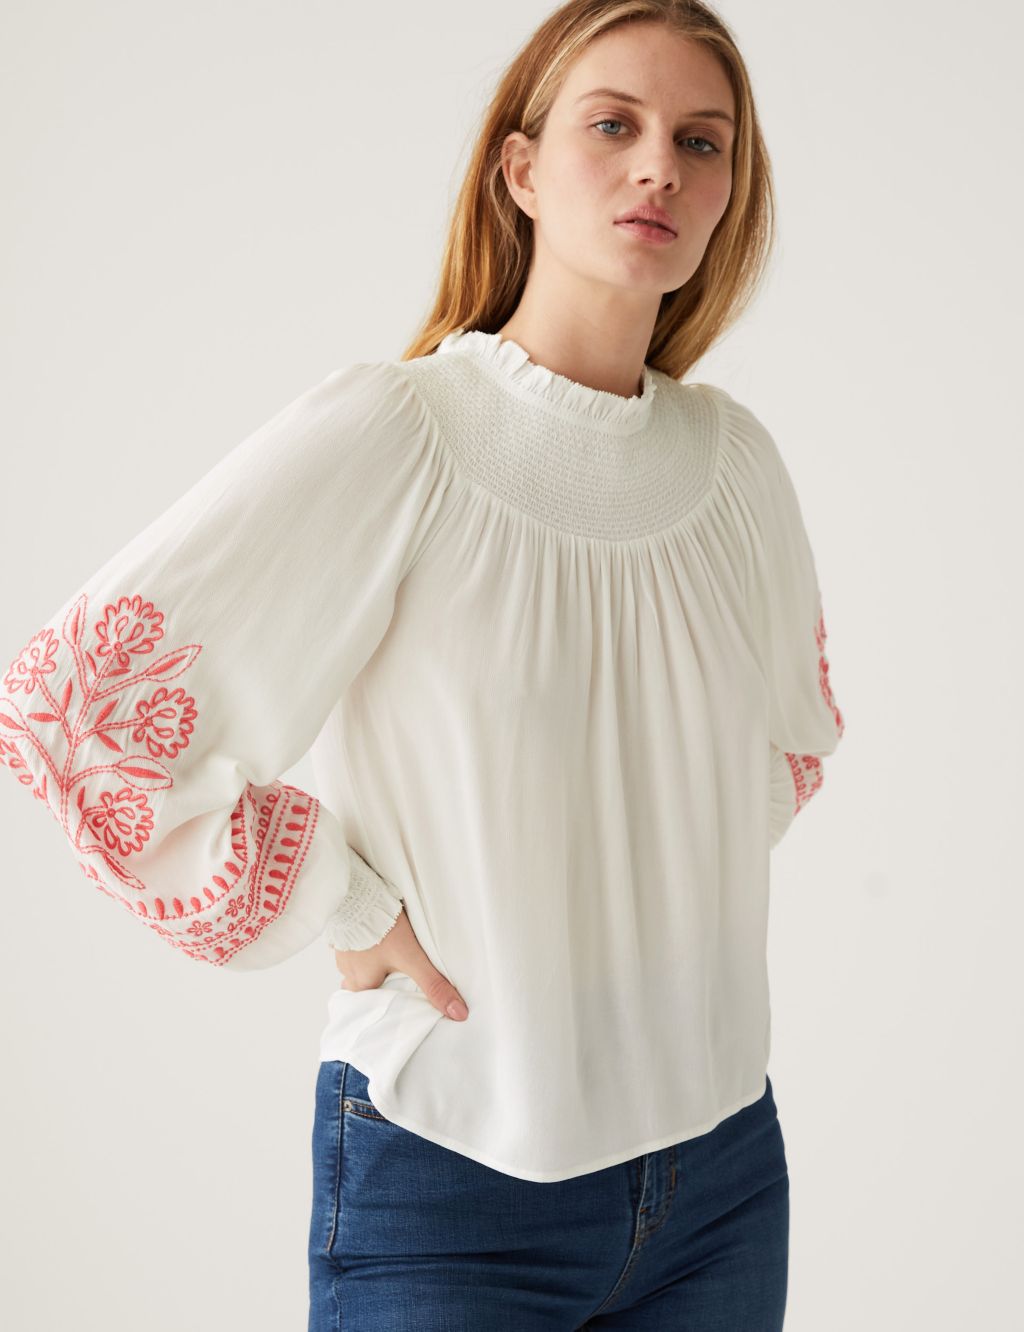 Embroidered Funnel Neck Blouse image 2